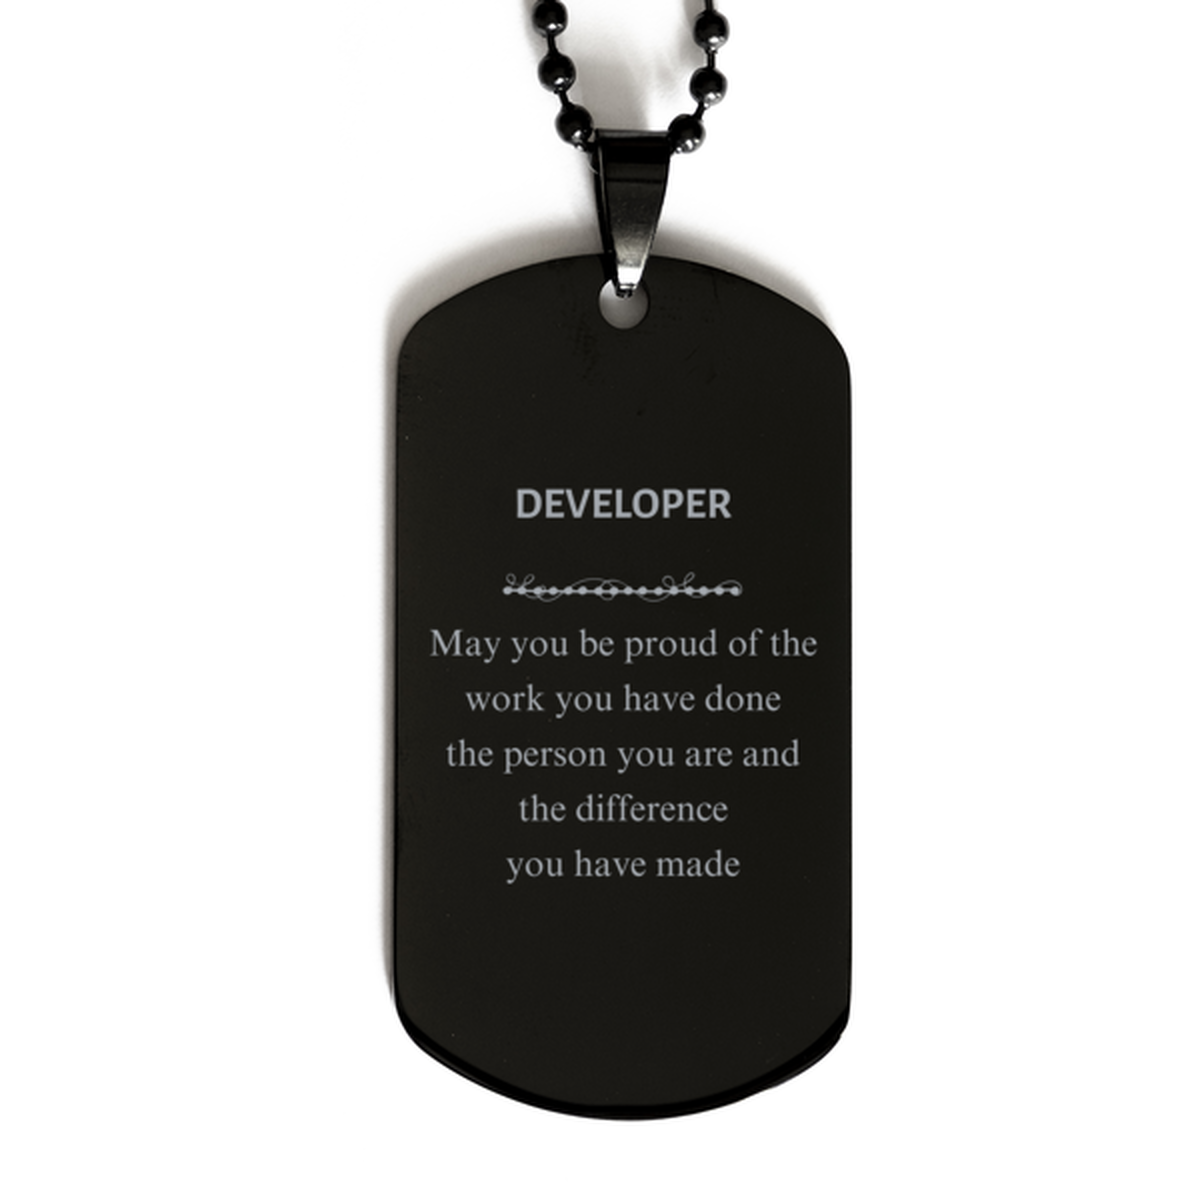 Developer May you be proud of the work you have done, Retirement Developer Black Dog Tag for Colleague Appreciation Gifts Amazing for Developer